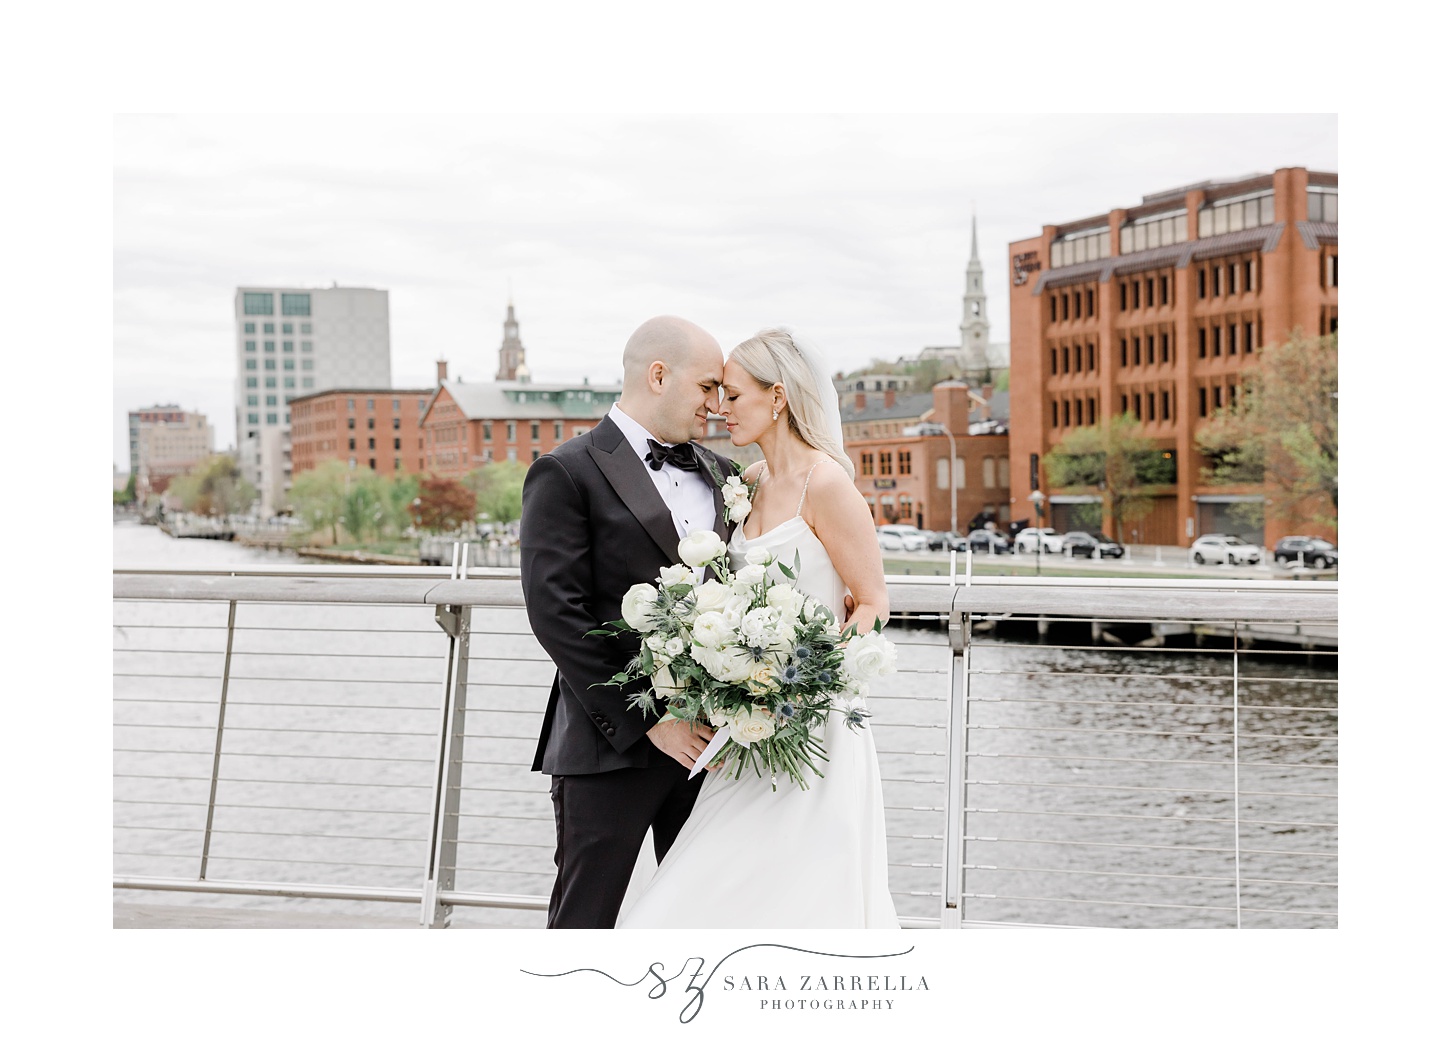 newlyweds lean heads together against railing at the Providence pedestrian bridge